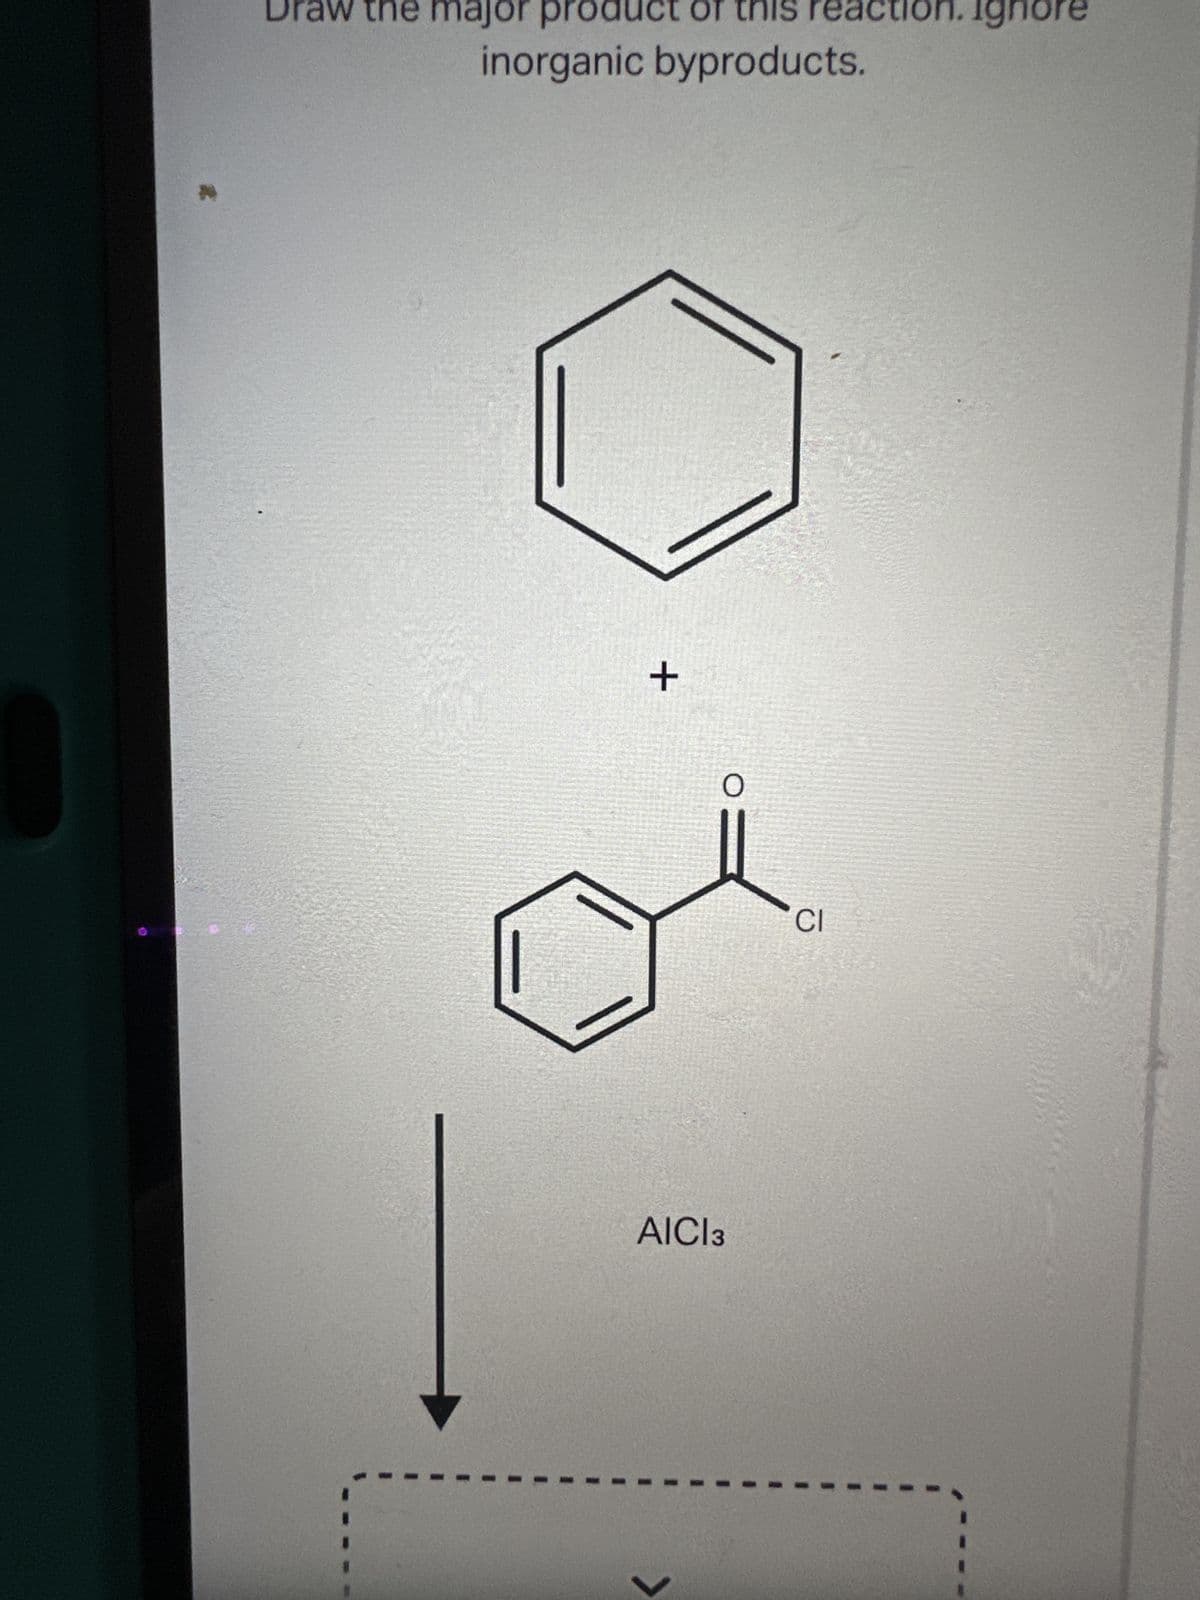 Draw the major product of this reaction. Ignore
inorganic byproducts.
+
O
AICI 3
CI